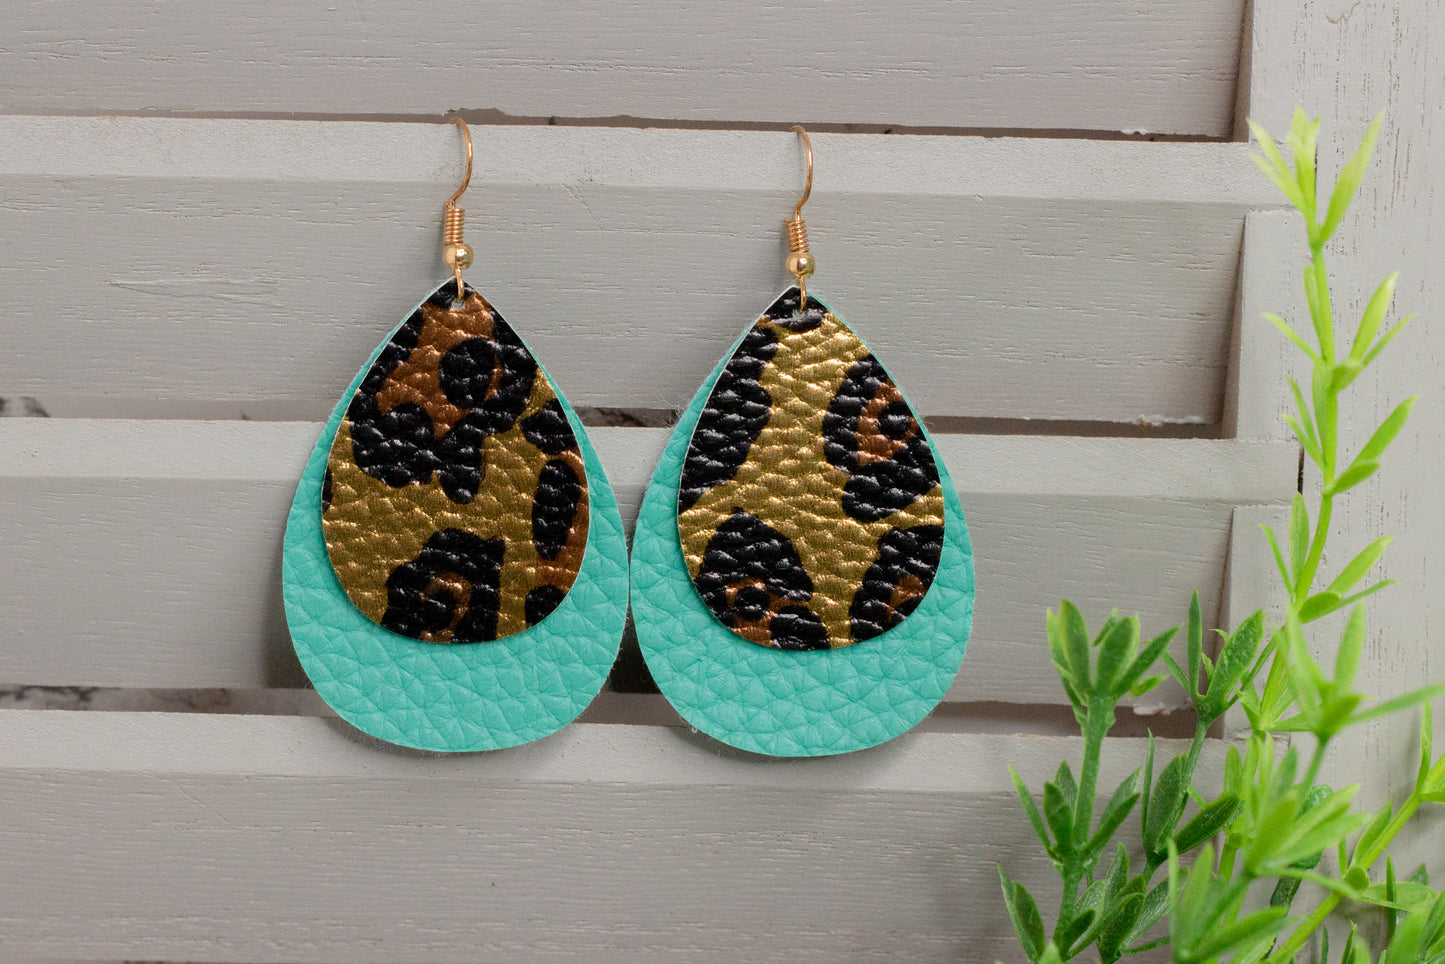 Cheetah Print and Turquoise Faux Leather Earrings